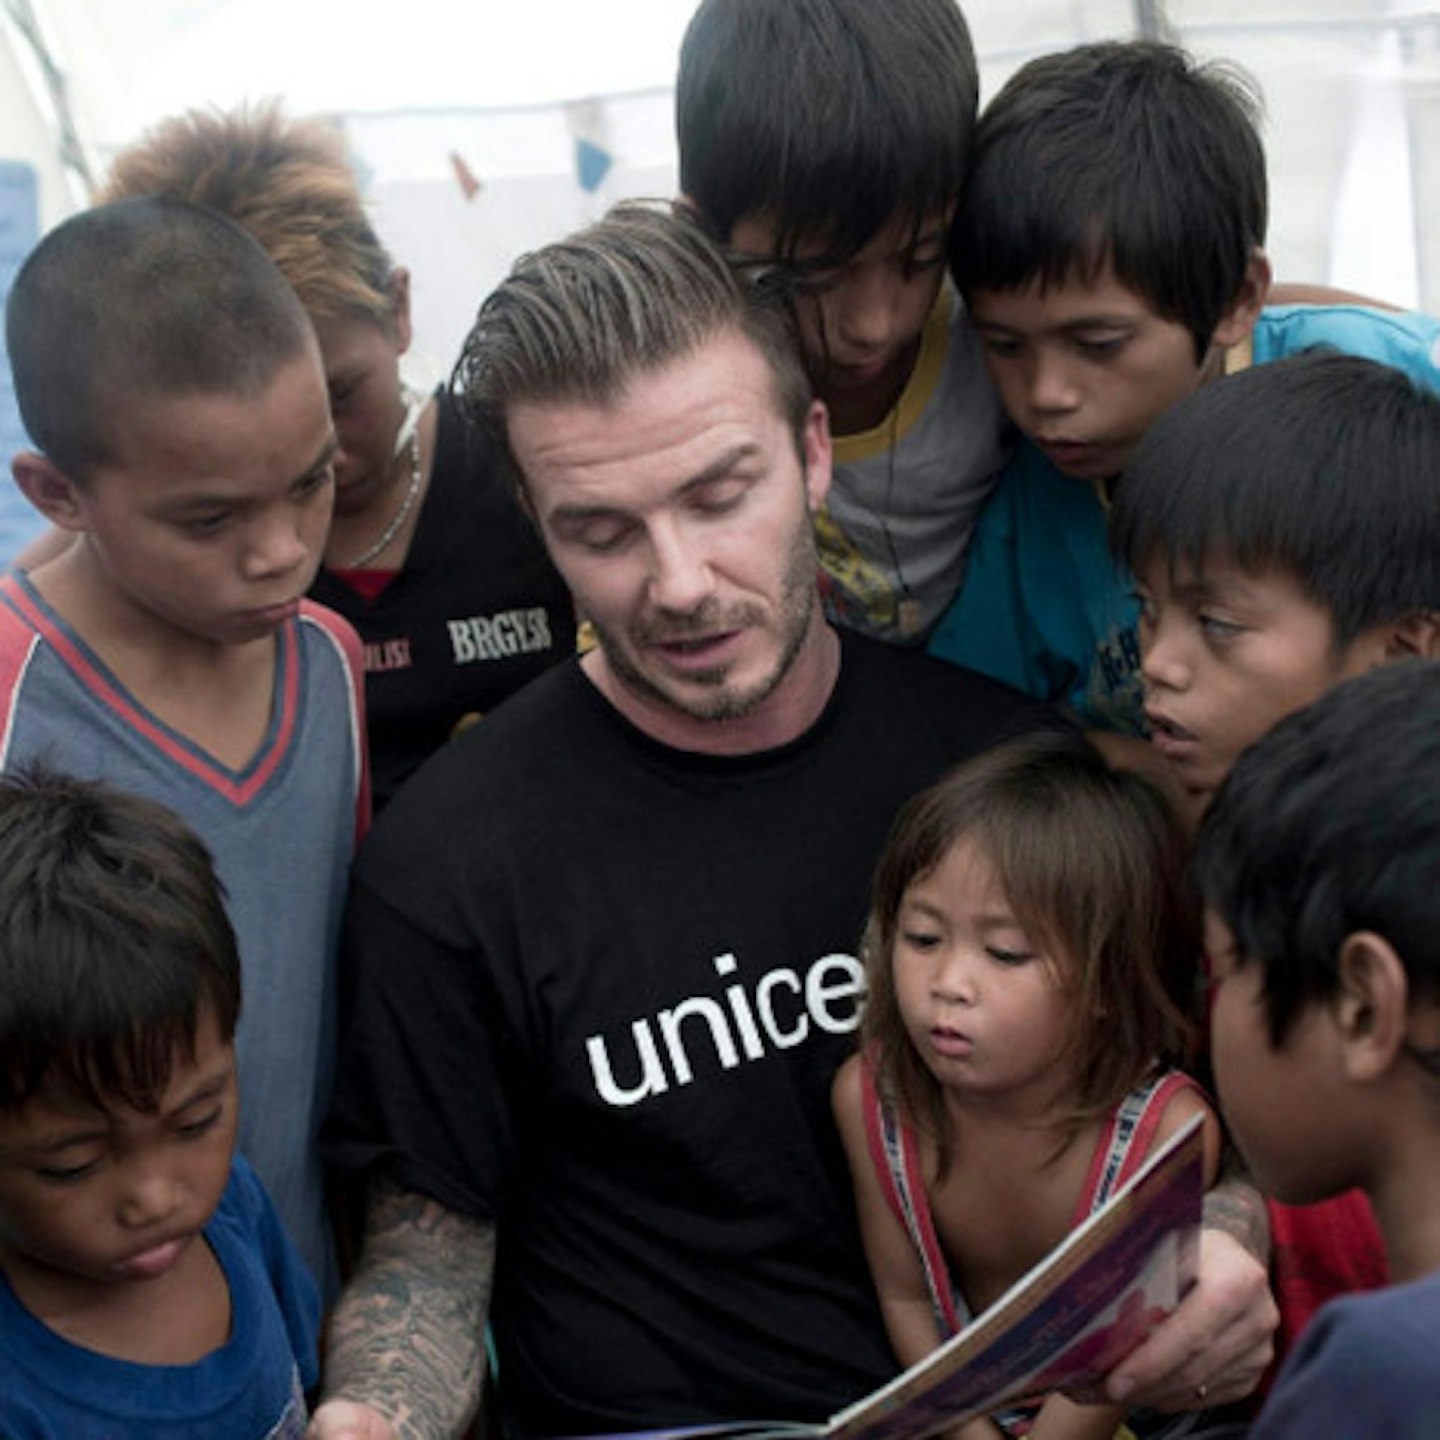 David' Unicef work has seen him previously visit the child victims of Typhoon Haiyan in the Philippines